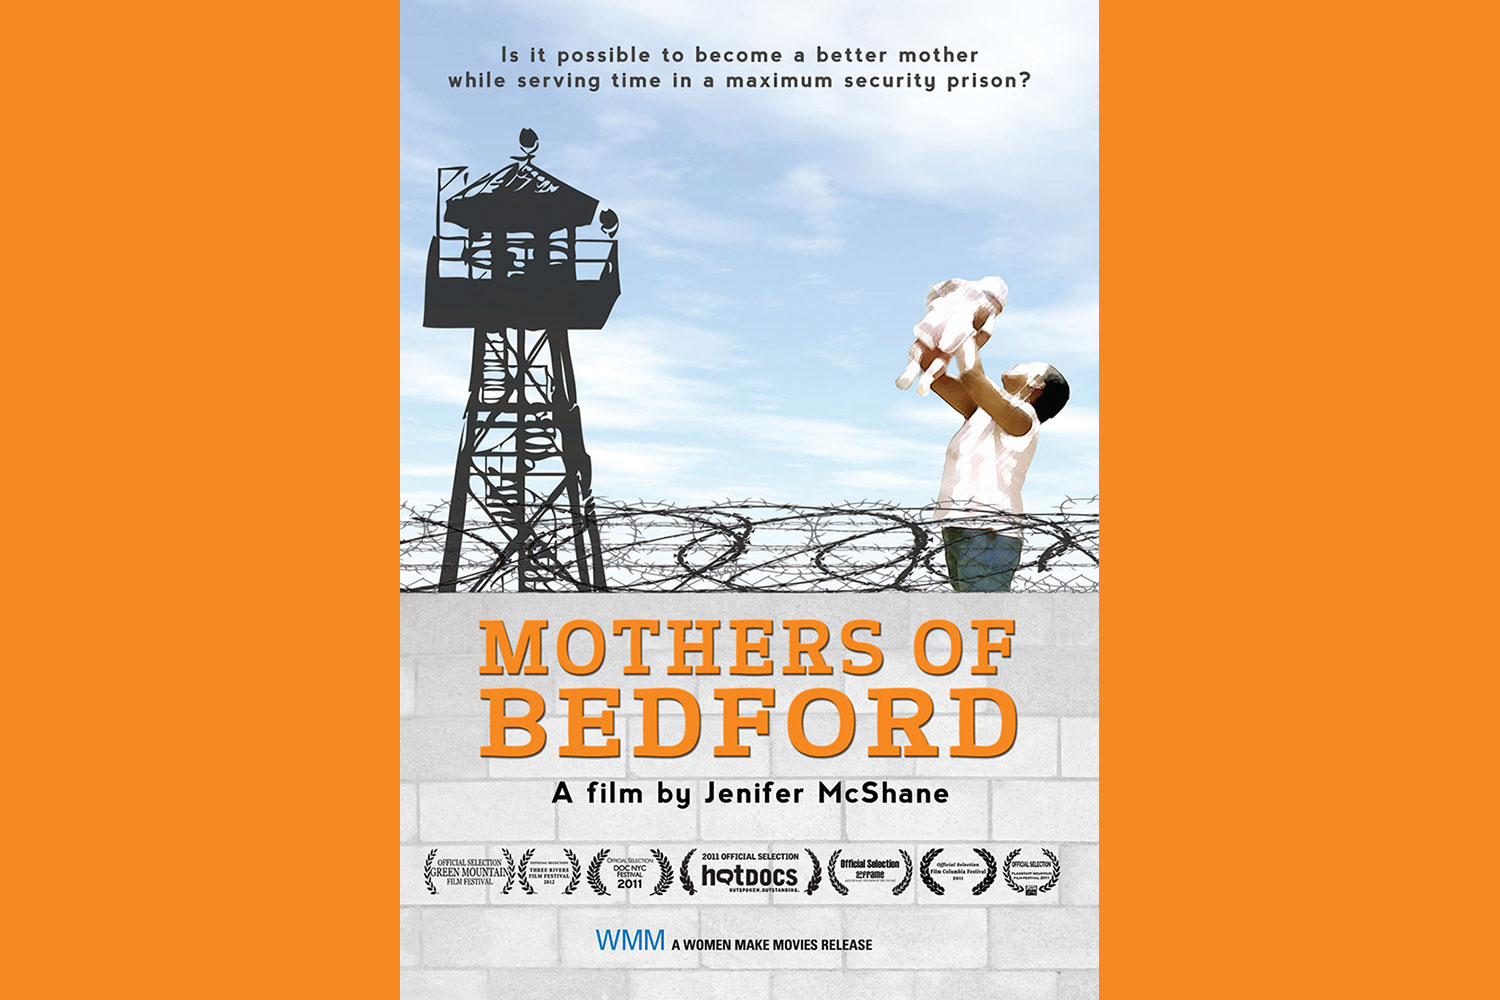 Mothers of Bedford film poster